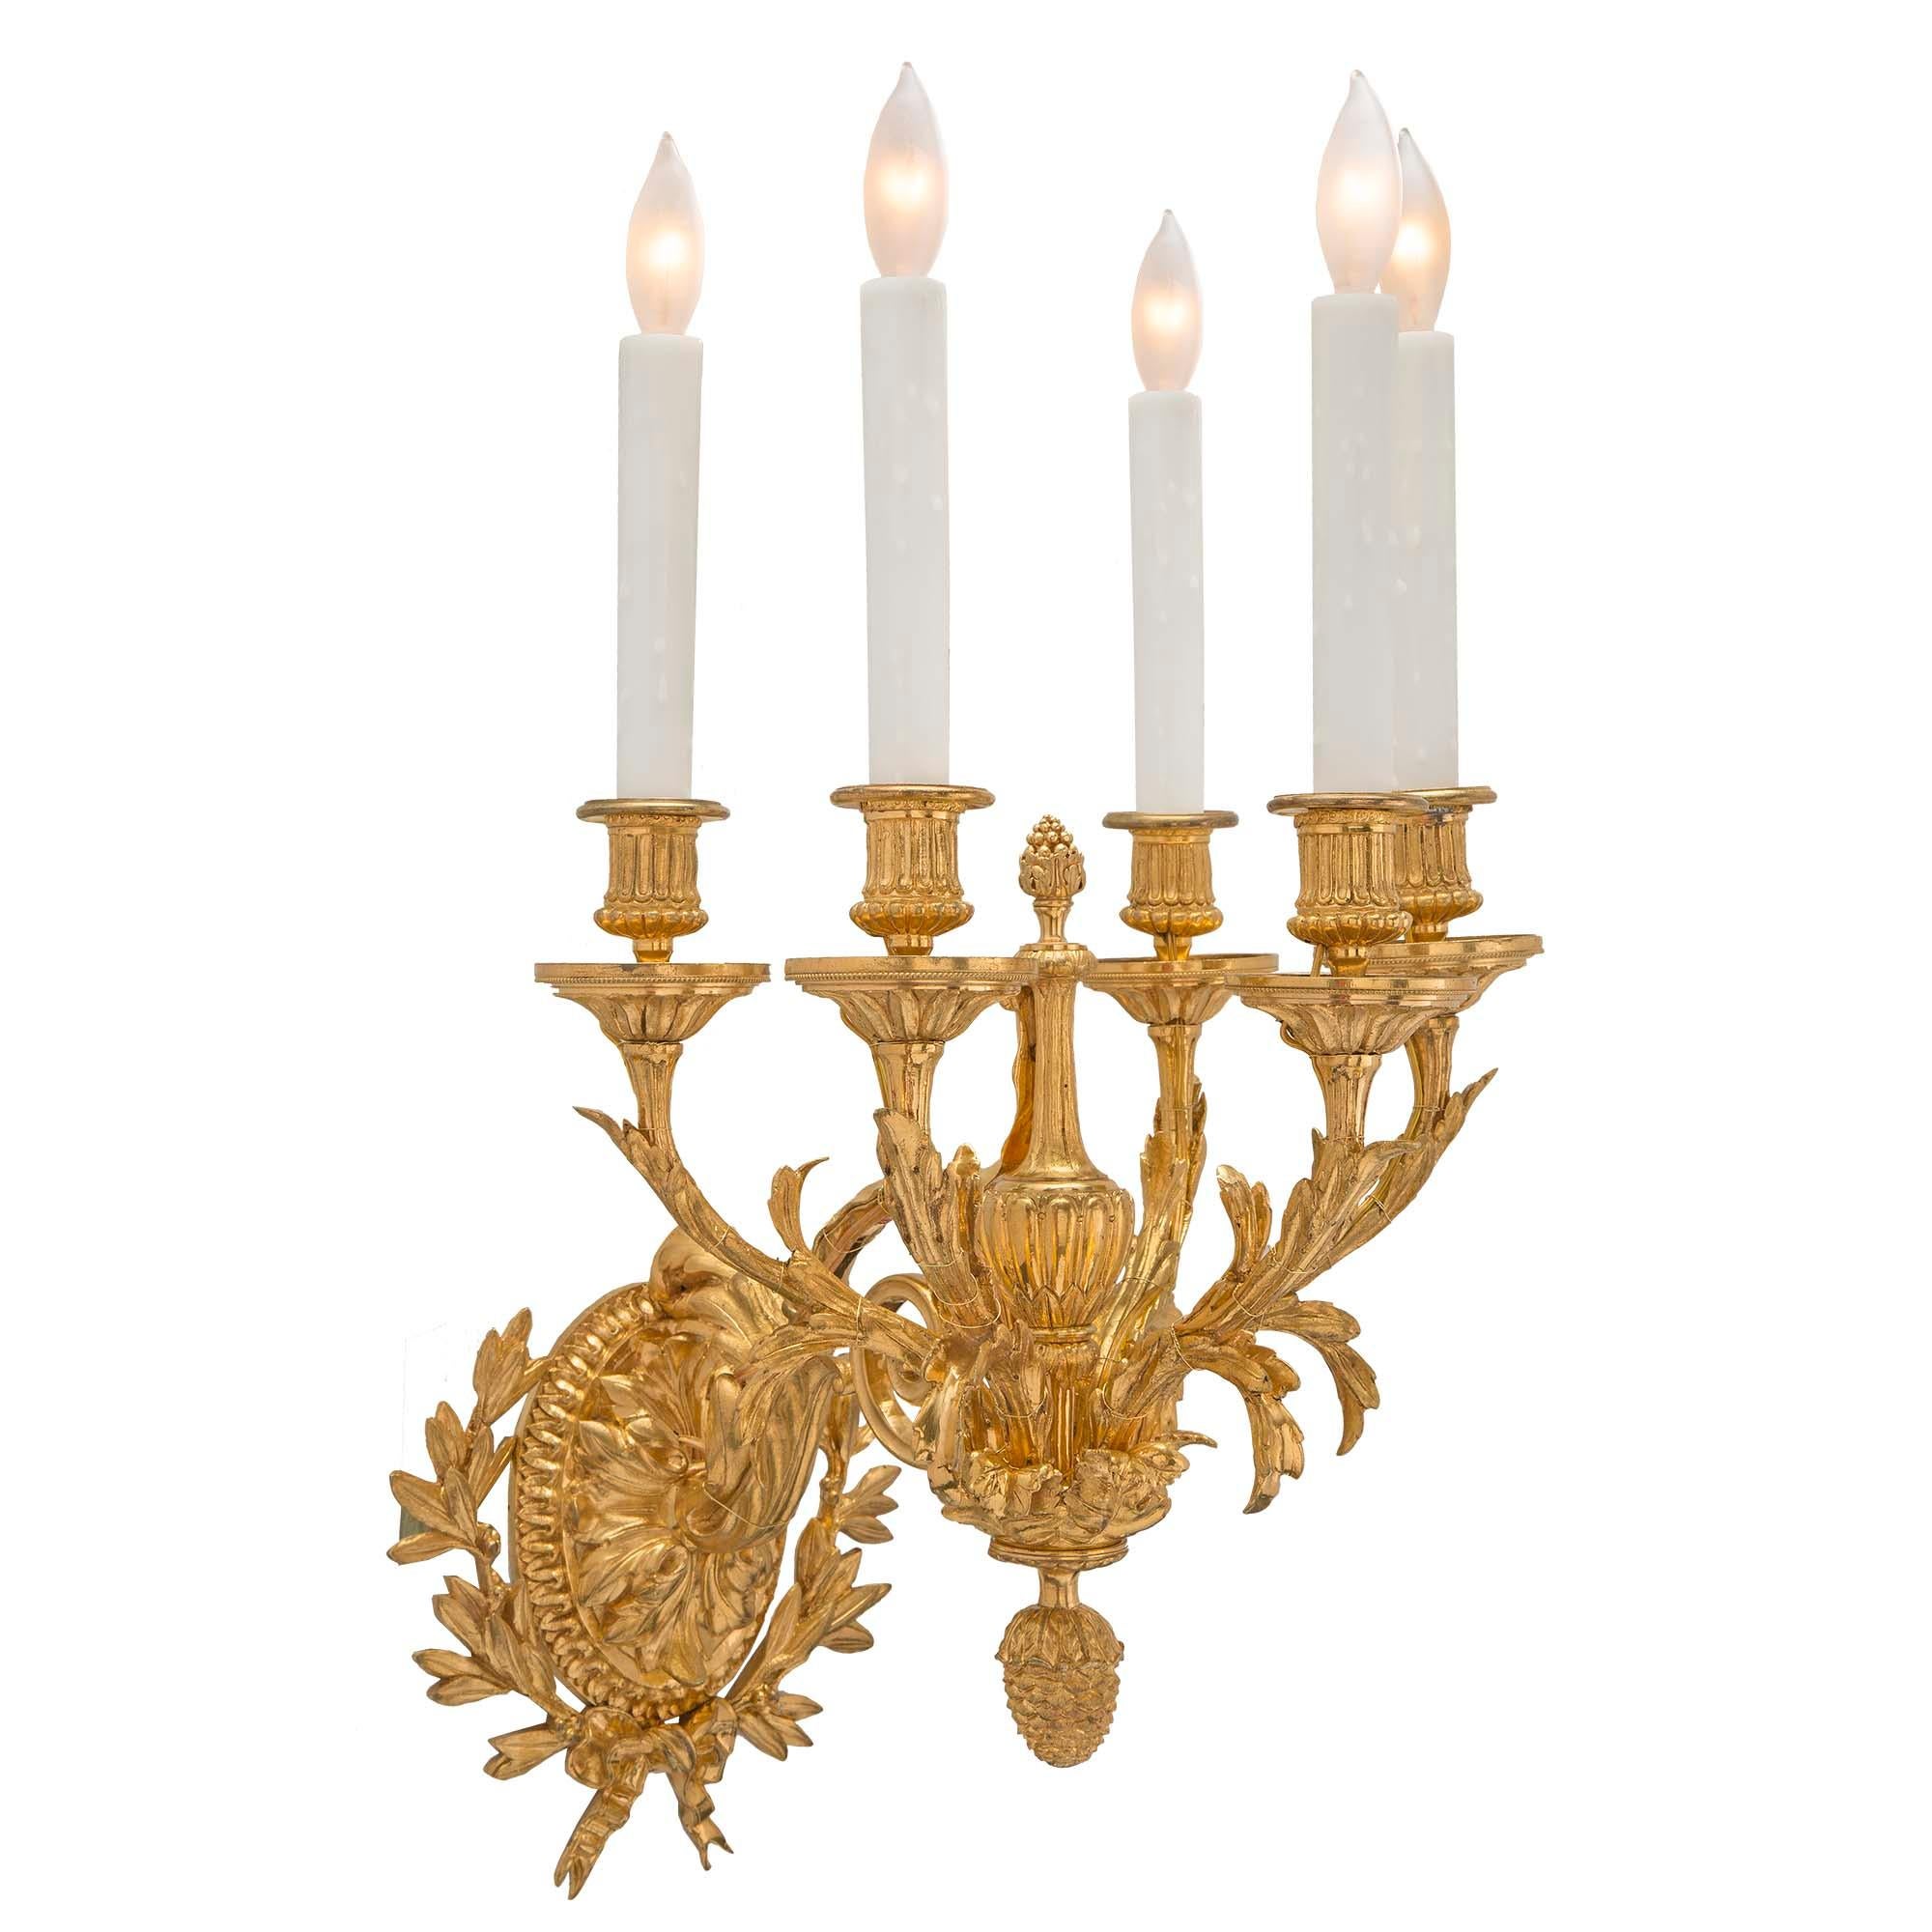 A striking pair of French 19th century Louis XVI st. five arm ormolu sconces. Each sconce is centered by a richly chased berried acorn inverted finial below the exceptional central support decorated with final foliate movements. The five elegantly